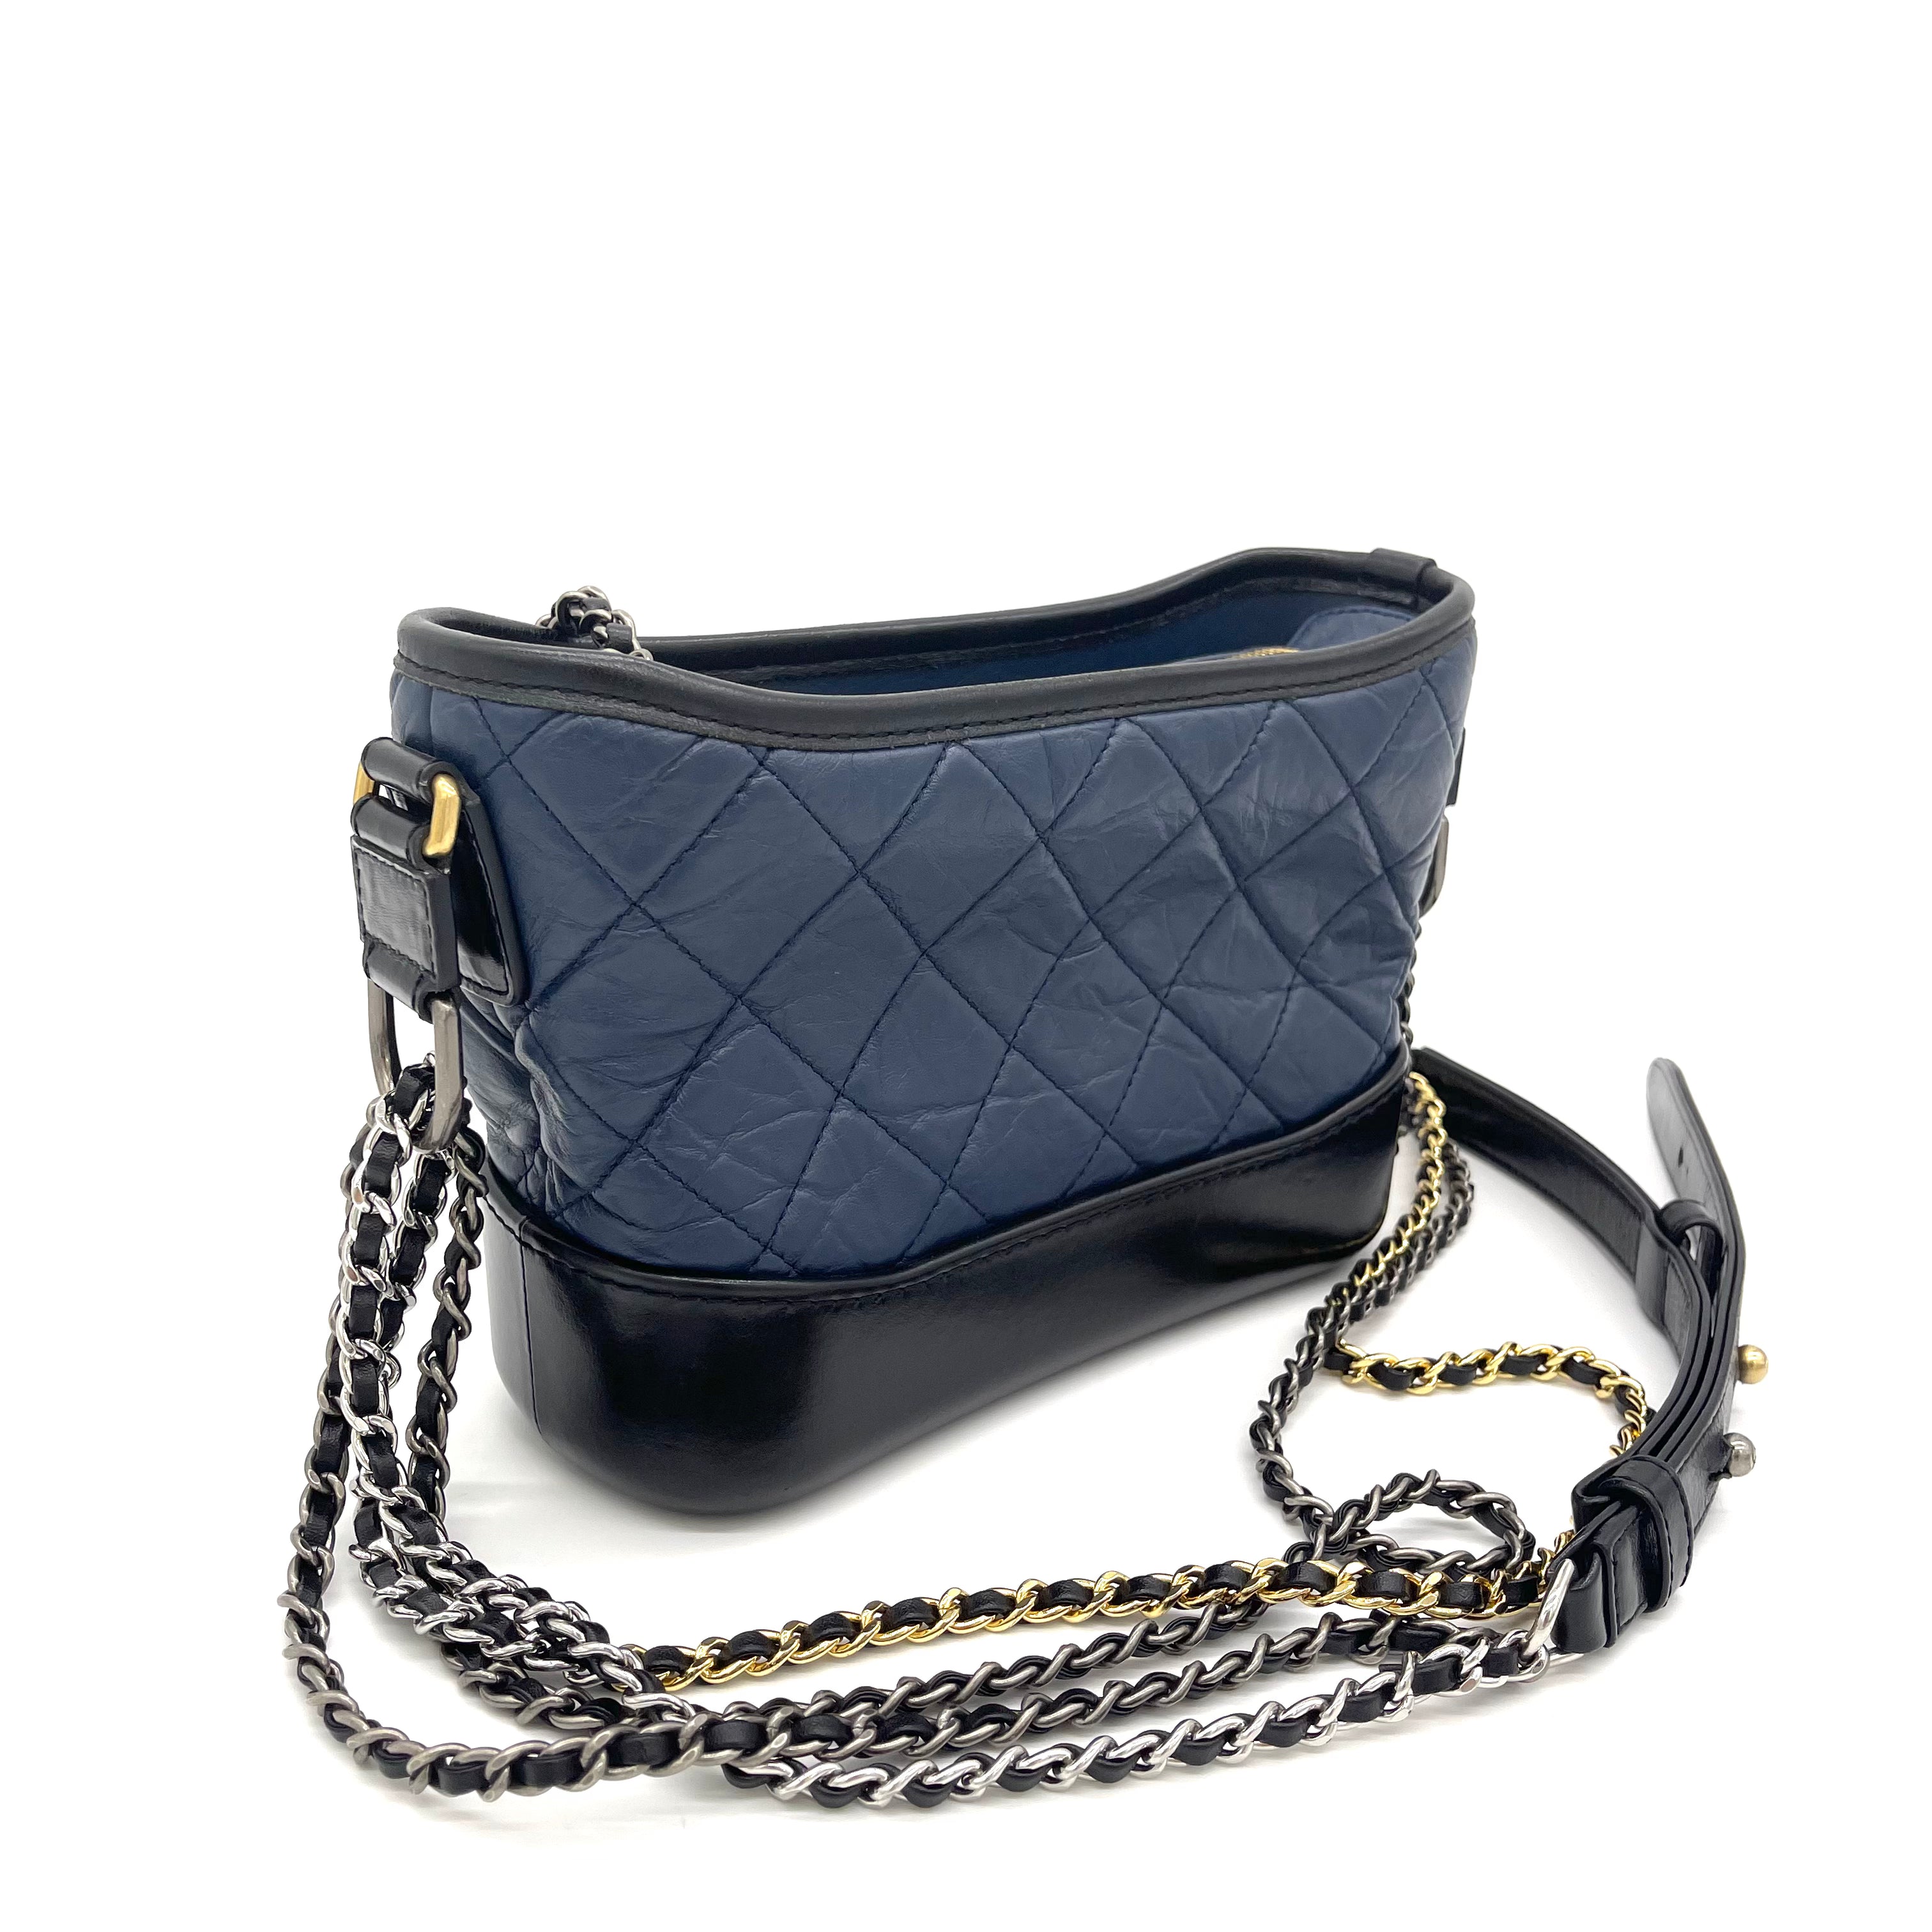 CHANEL Aged Calfskin Quilted Small Gabrielle Hobo Navy Black